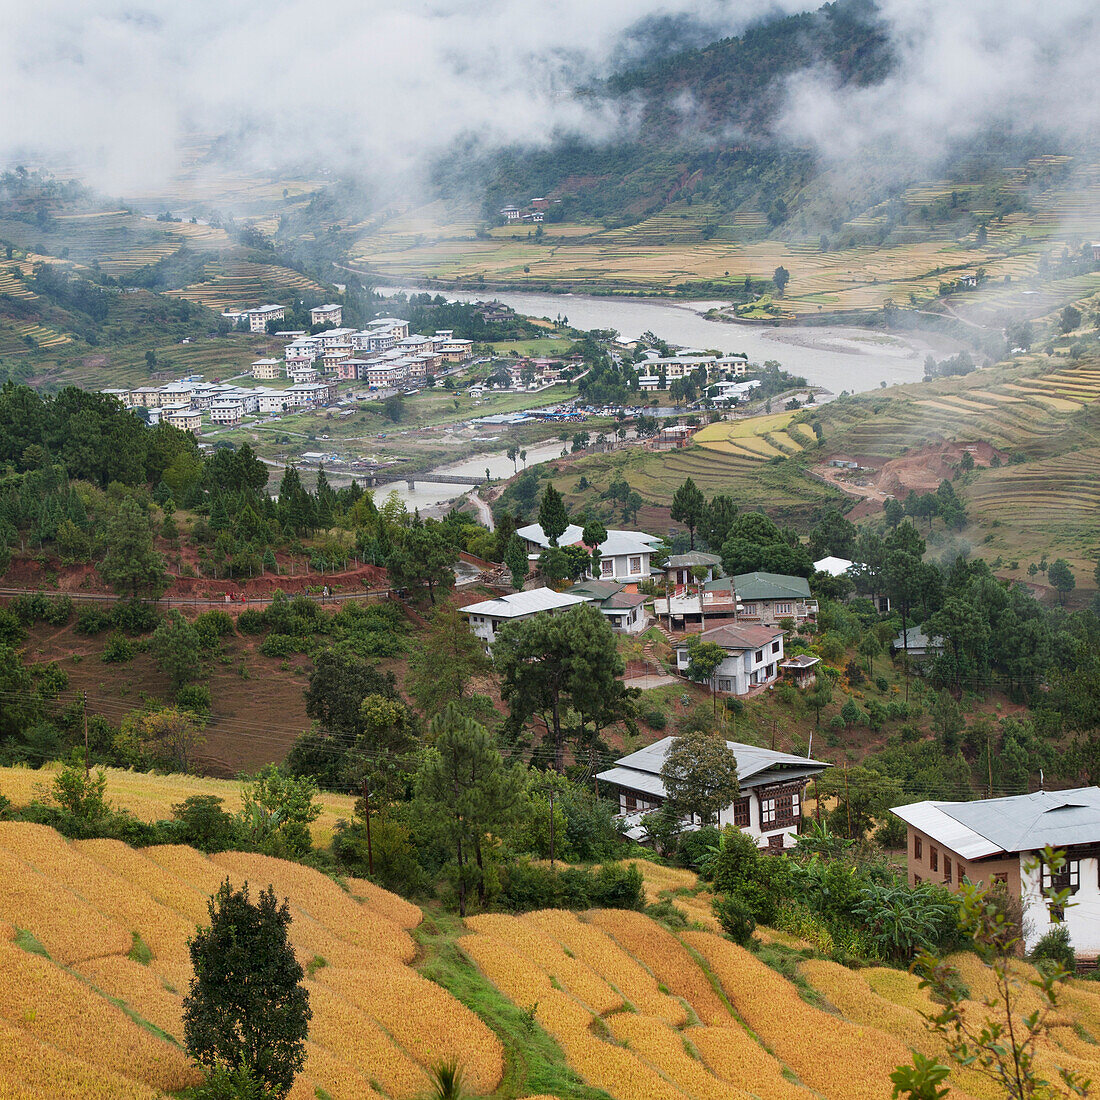 'View Of Rice Terraces And Houses In A Valley; Punakha District Bhutan'